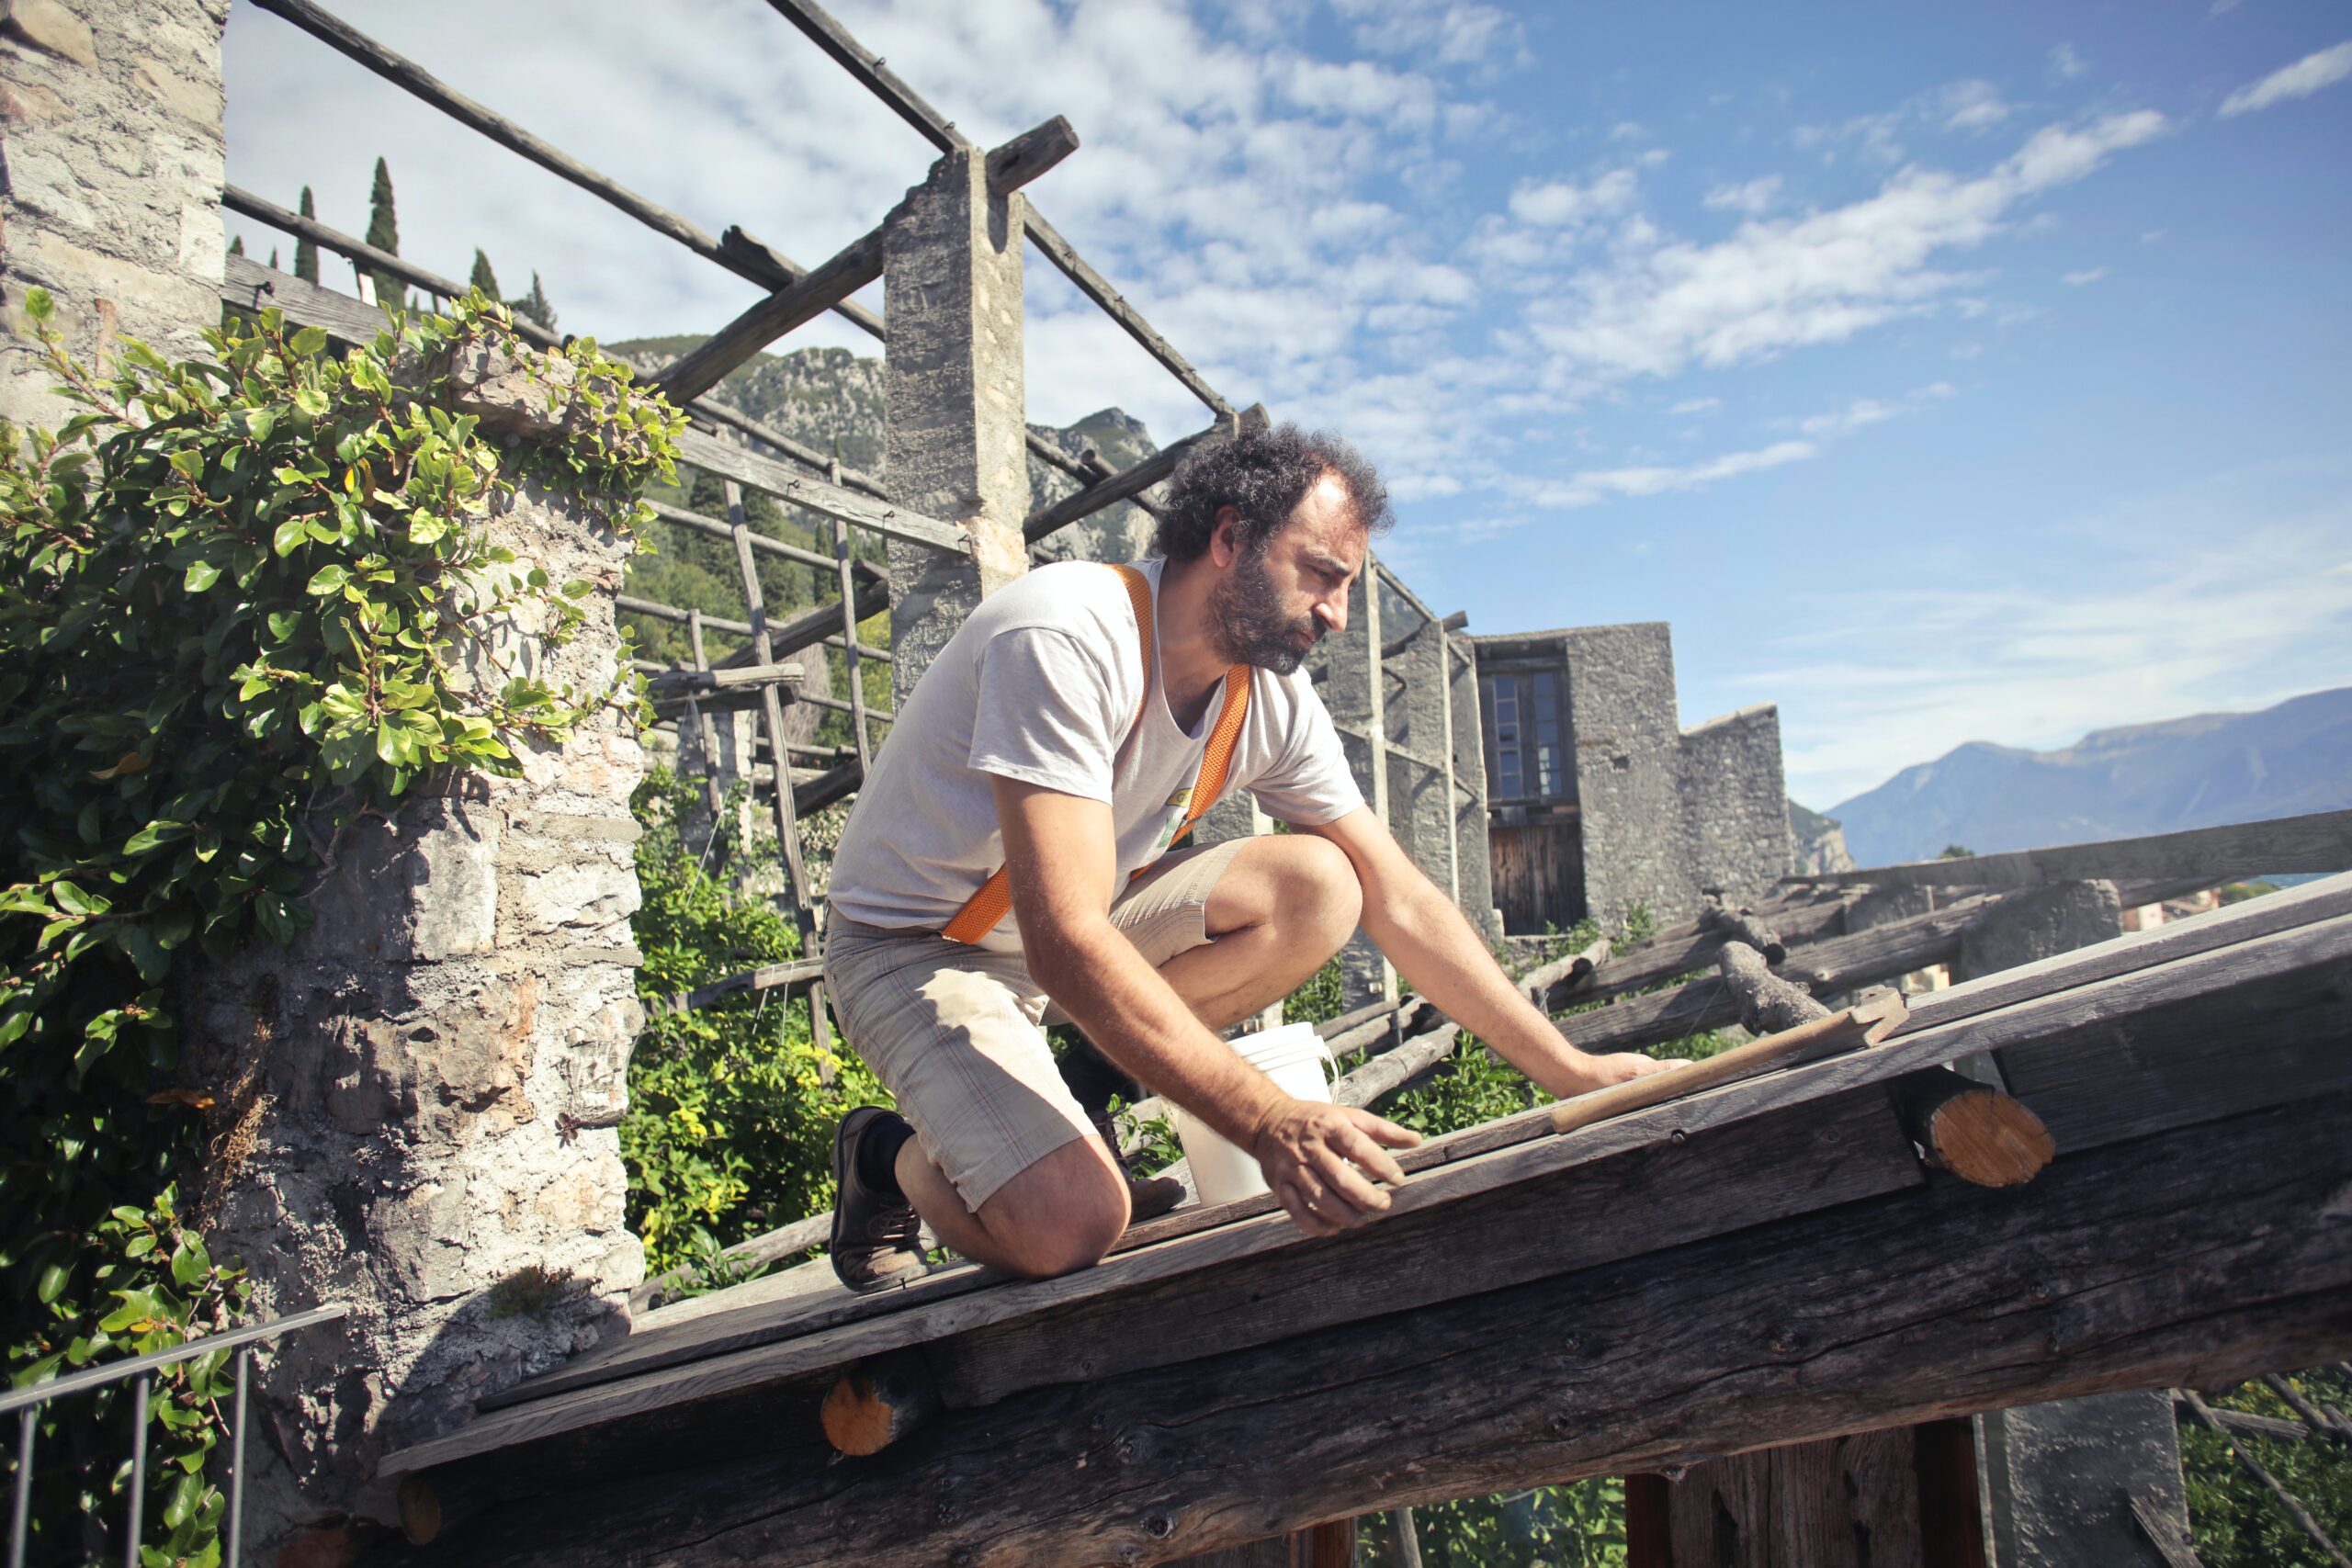 A man repairing a roof of a house